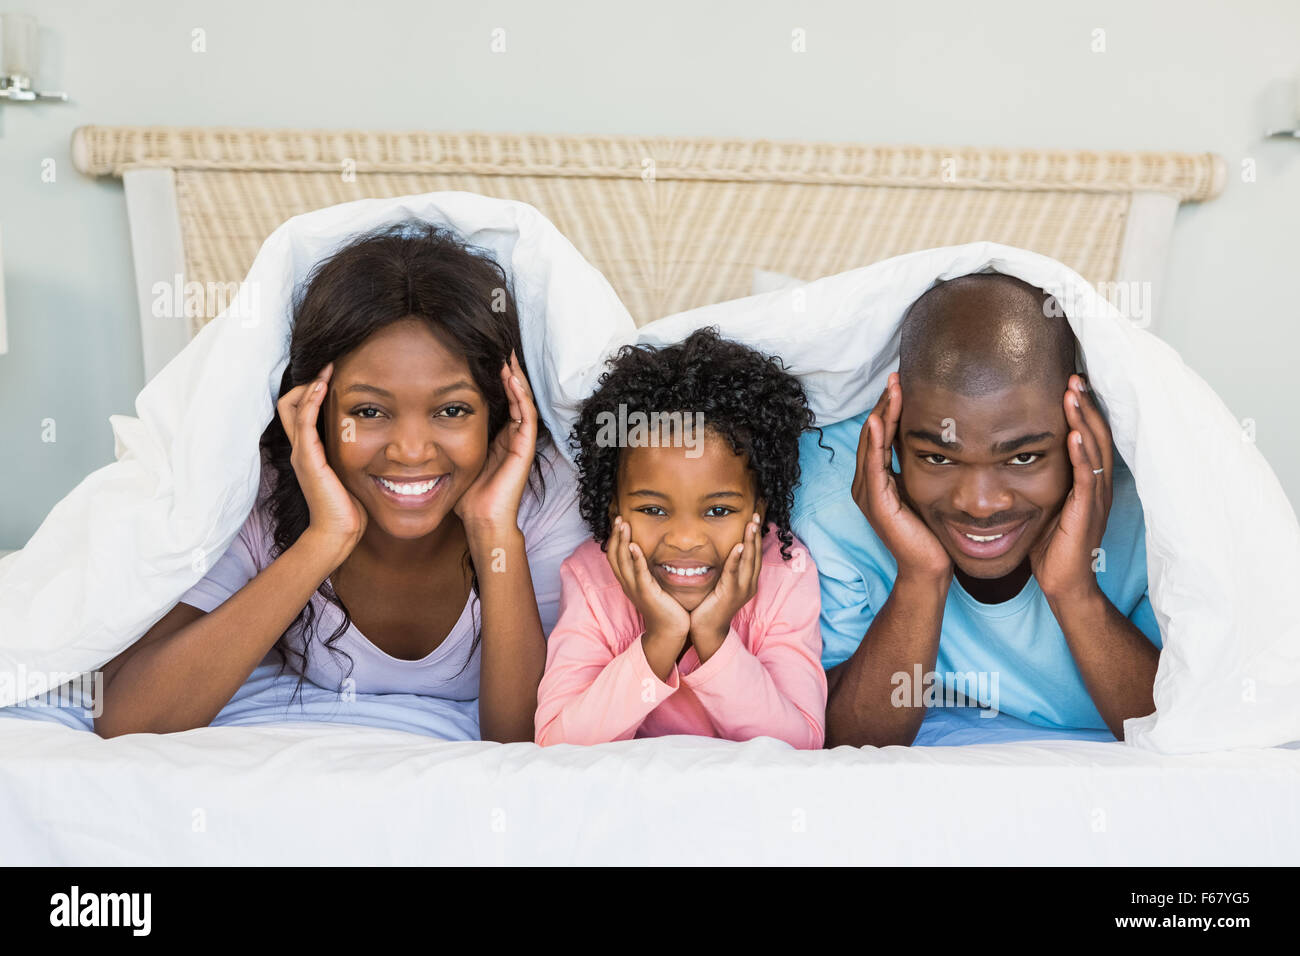 Happy Family lying on bed Banque D'Images